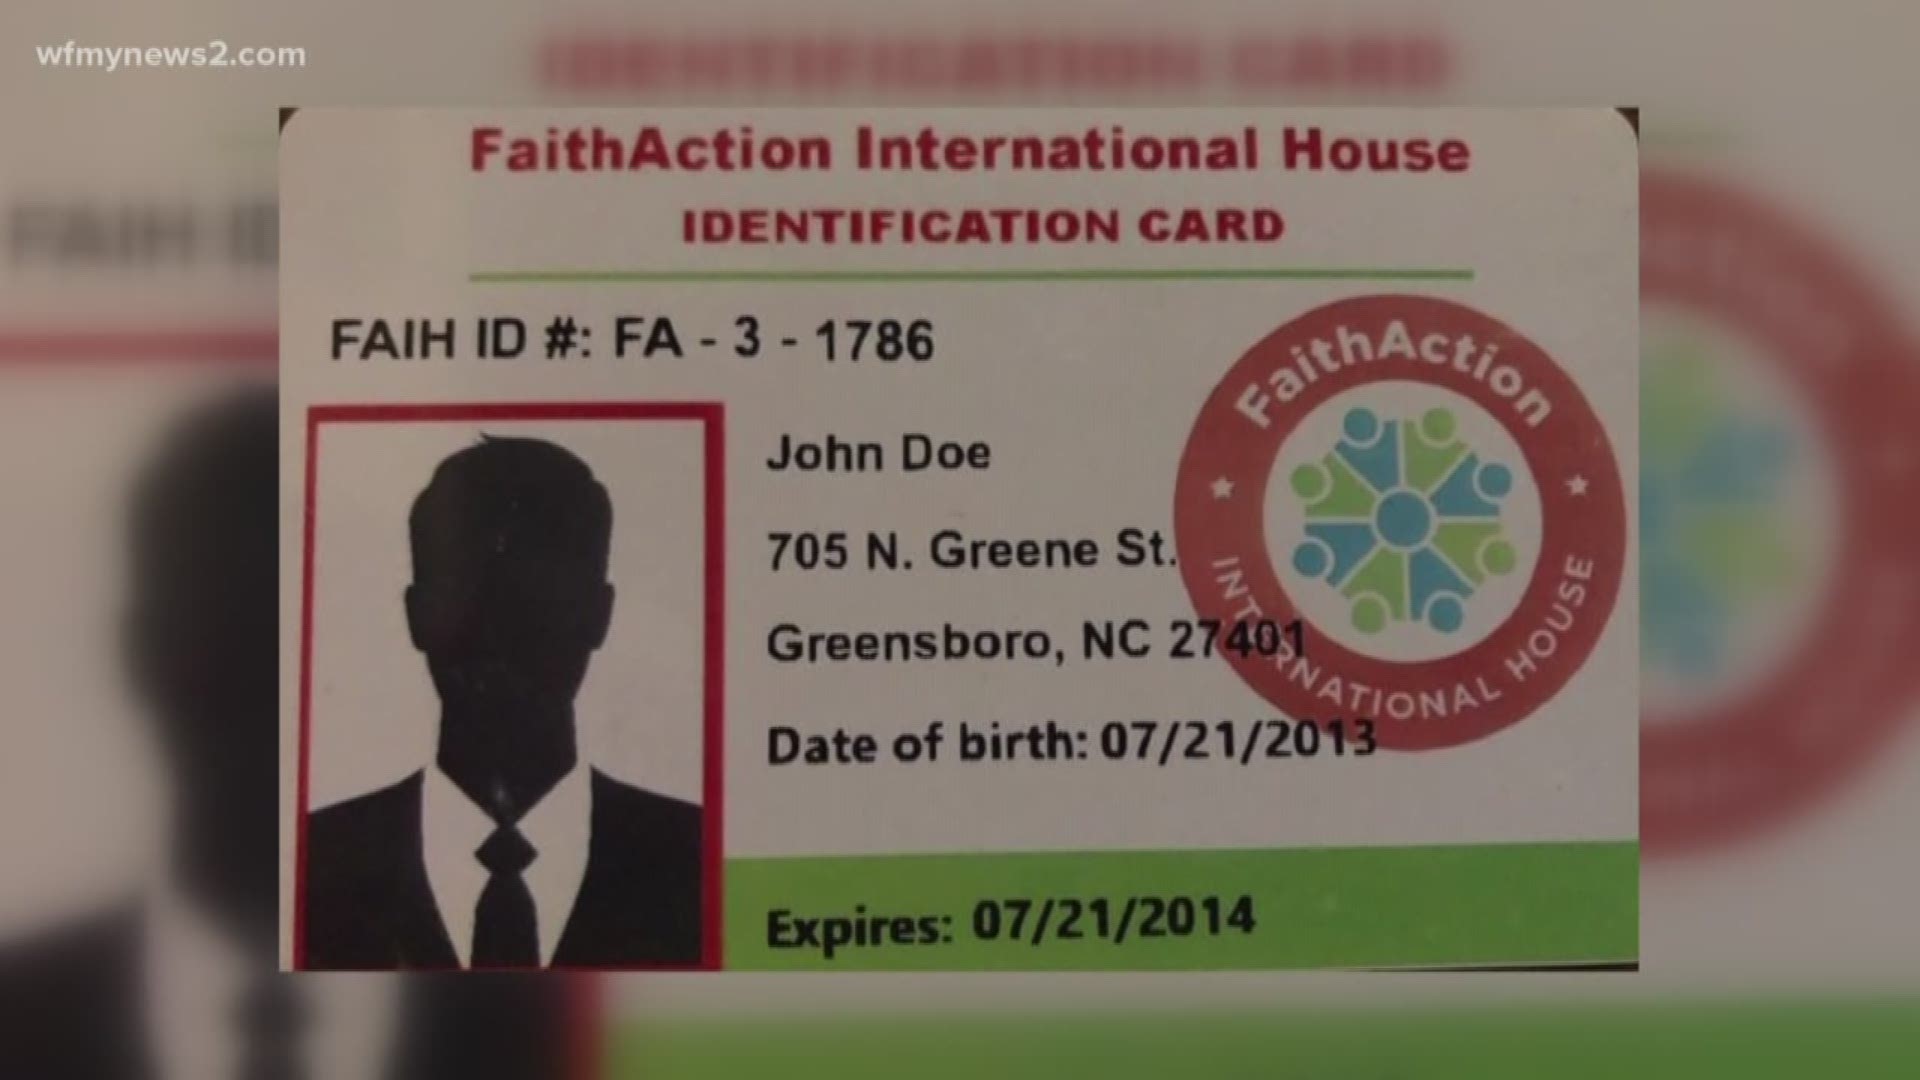 Community identifications cards issued by nonprofit groups are growing in popularity. Now the Guilford County Sheriff's office says it too will recognize Faith Action ID cards as an acceptable form of identification. Sheriff Rogers says the ID serves as a tool to help identify, protect and serve the community especially in the absence of any other form of ID.